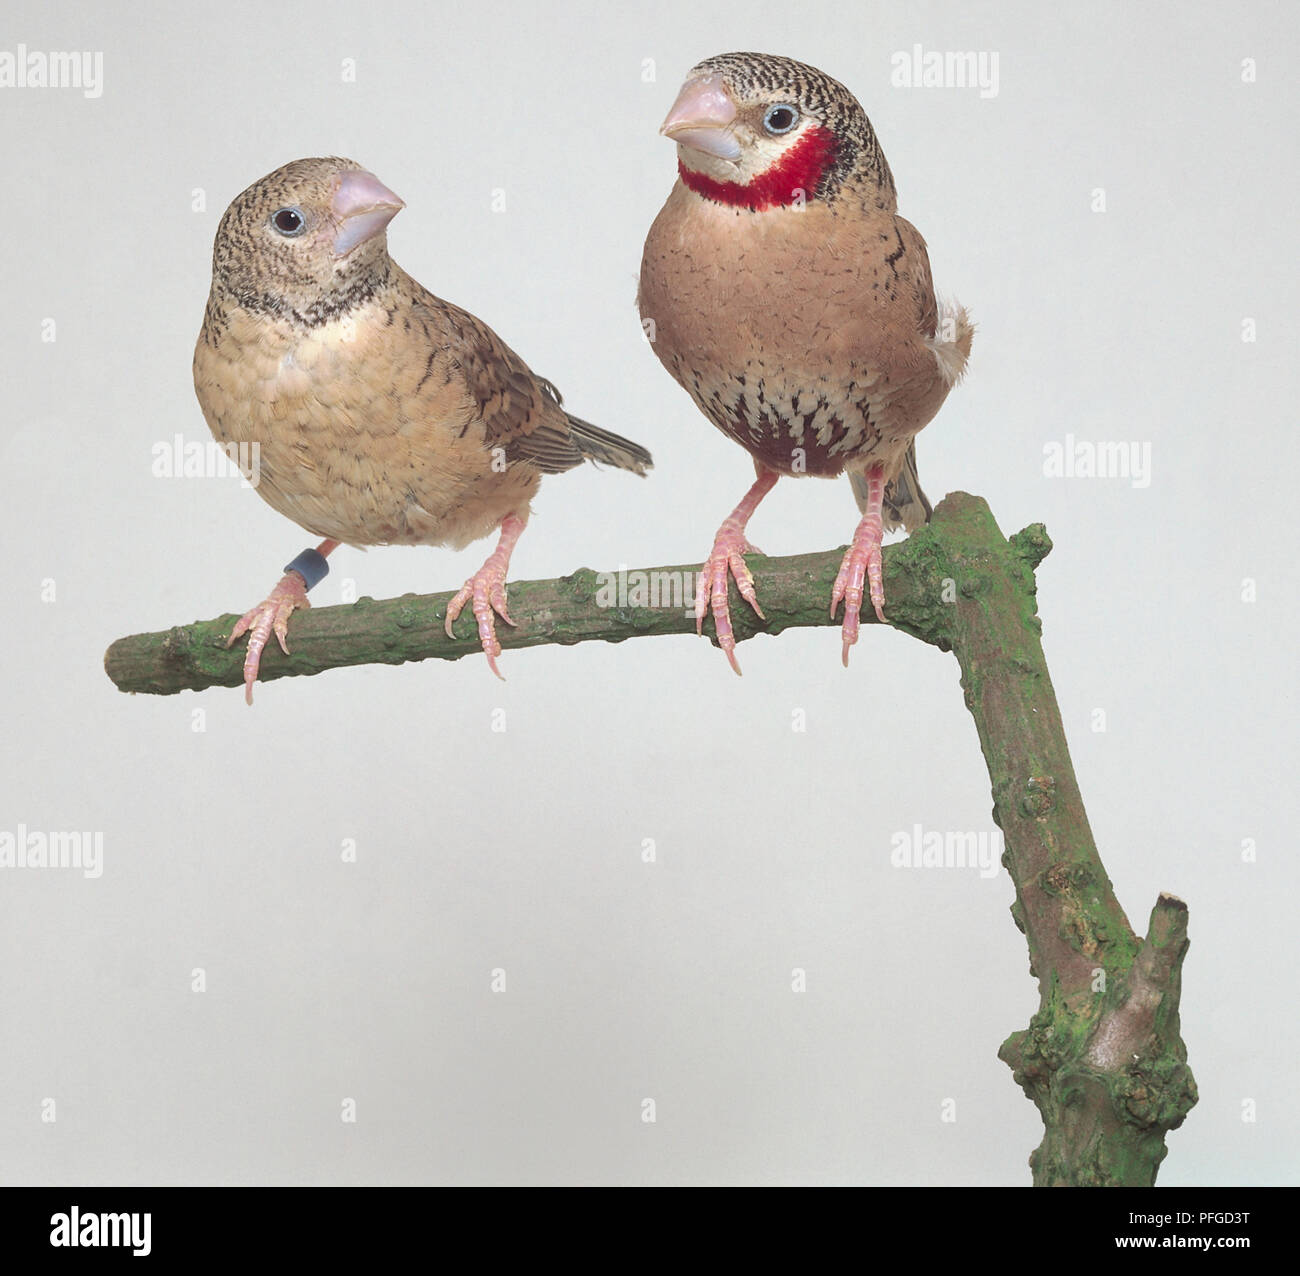 TWO CUT THROAT FINCHES - FRONT VIEW Stock Photo